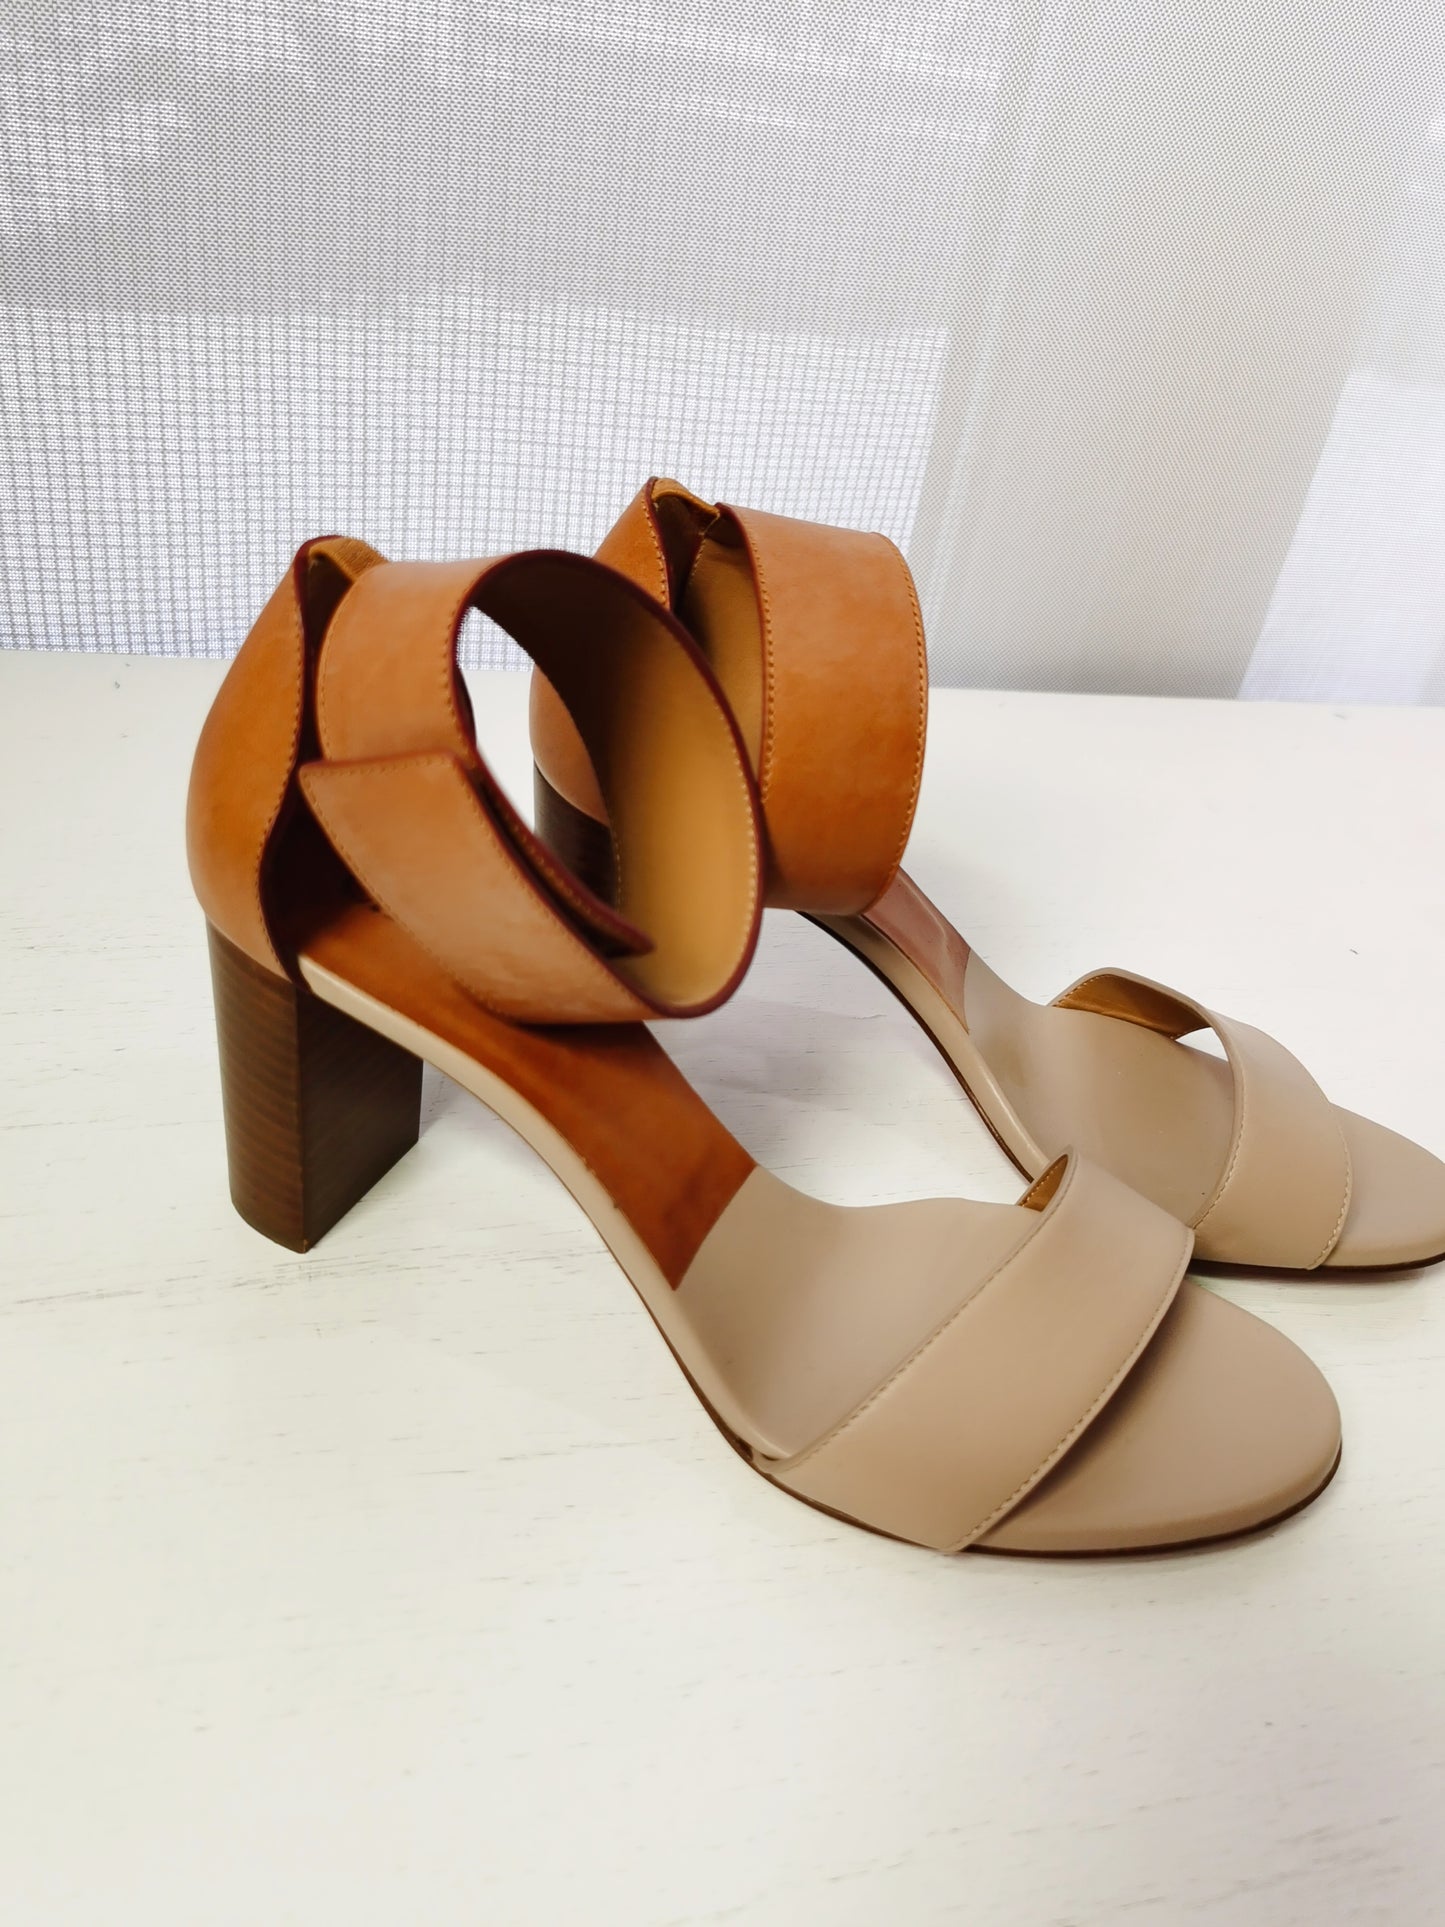 Chloe Leather Colorblock Pattern Sandals Size37